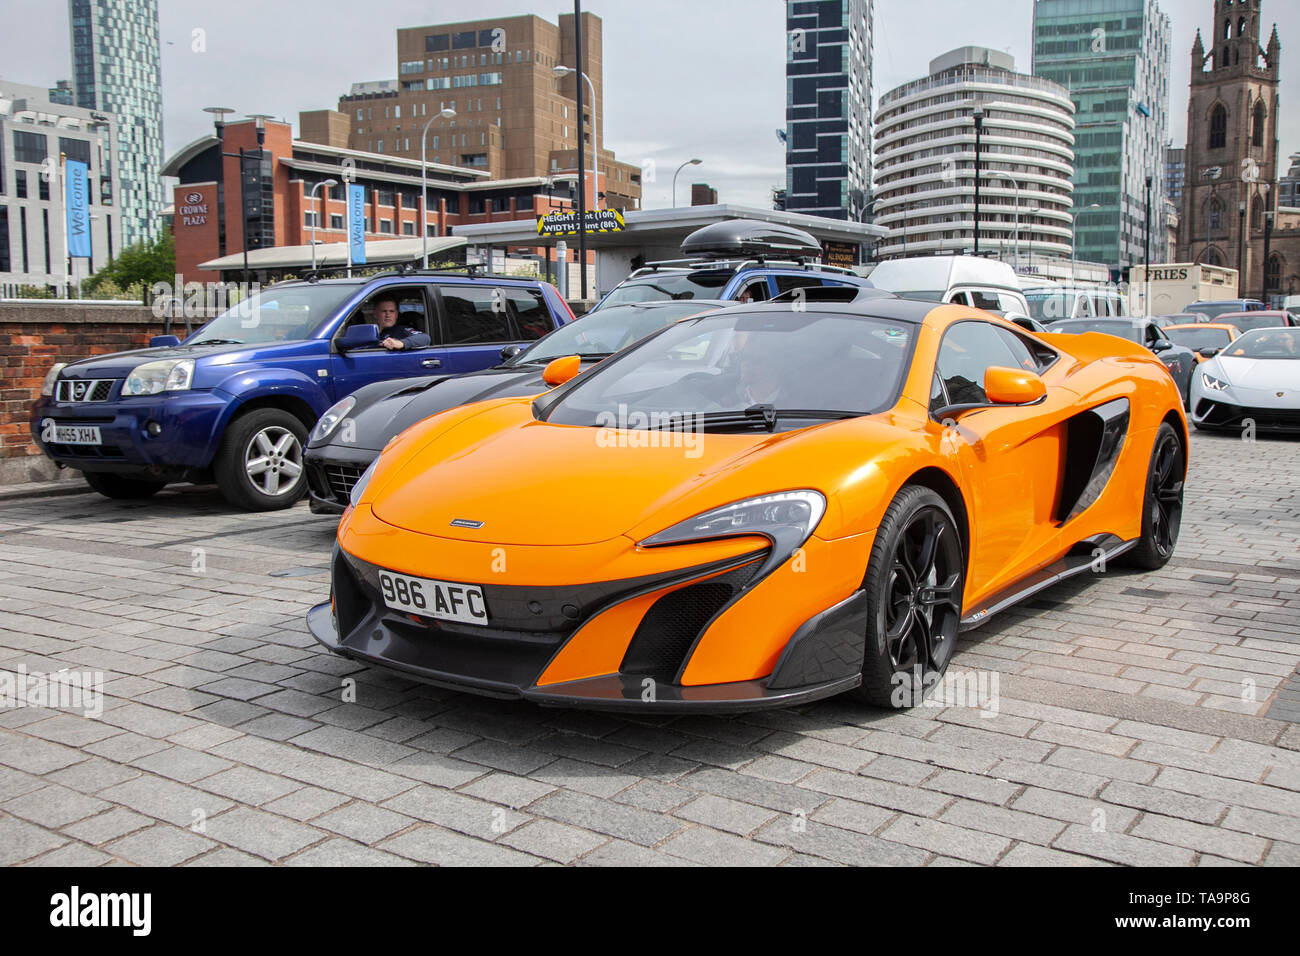 Liverpool, Merseyside. 23rd May, 2019 UK Weather: Fine, sunny sailing condition as up to 200 motorcyclists and tens of supercars including a Mclaren 675LT Coupe S-A, queue to board the ferry to the Isle of Man to attend the island TT races.  Extra ferry services are to be added to cope with the large demand for spectators travelling to attend this year’s top motor sport week of qualifying events of the fastest road race on the planet. Credit: MediaWorldImages/AlamyLiveNews Stock Photo